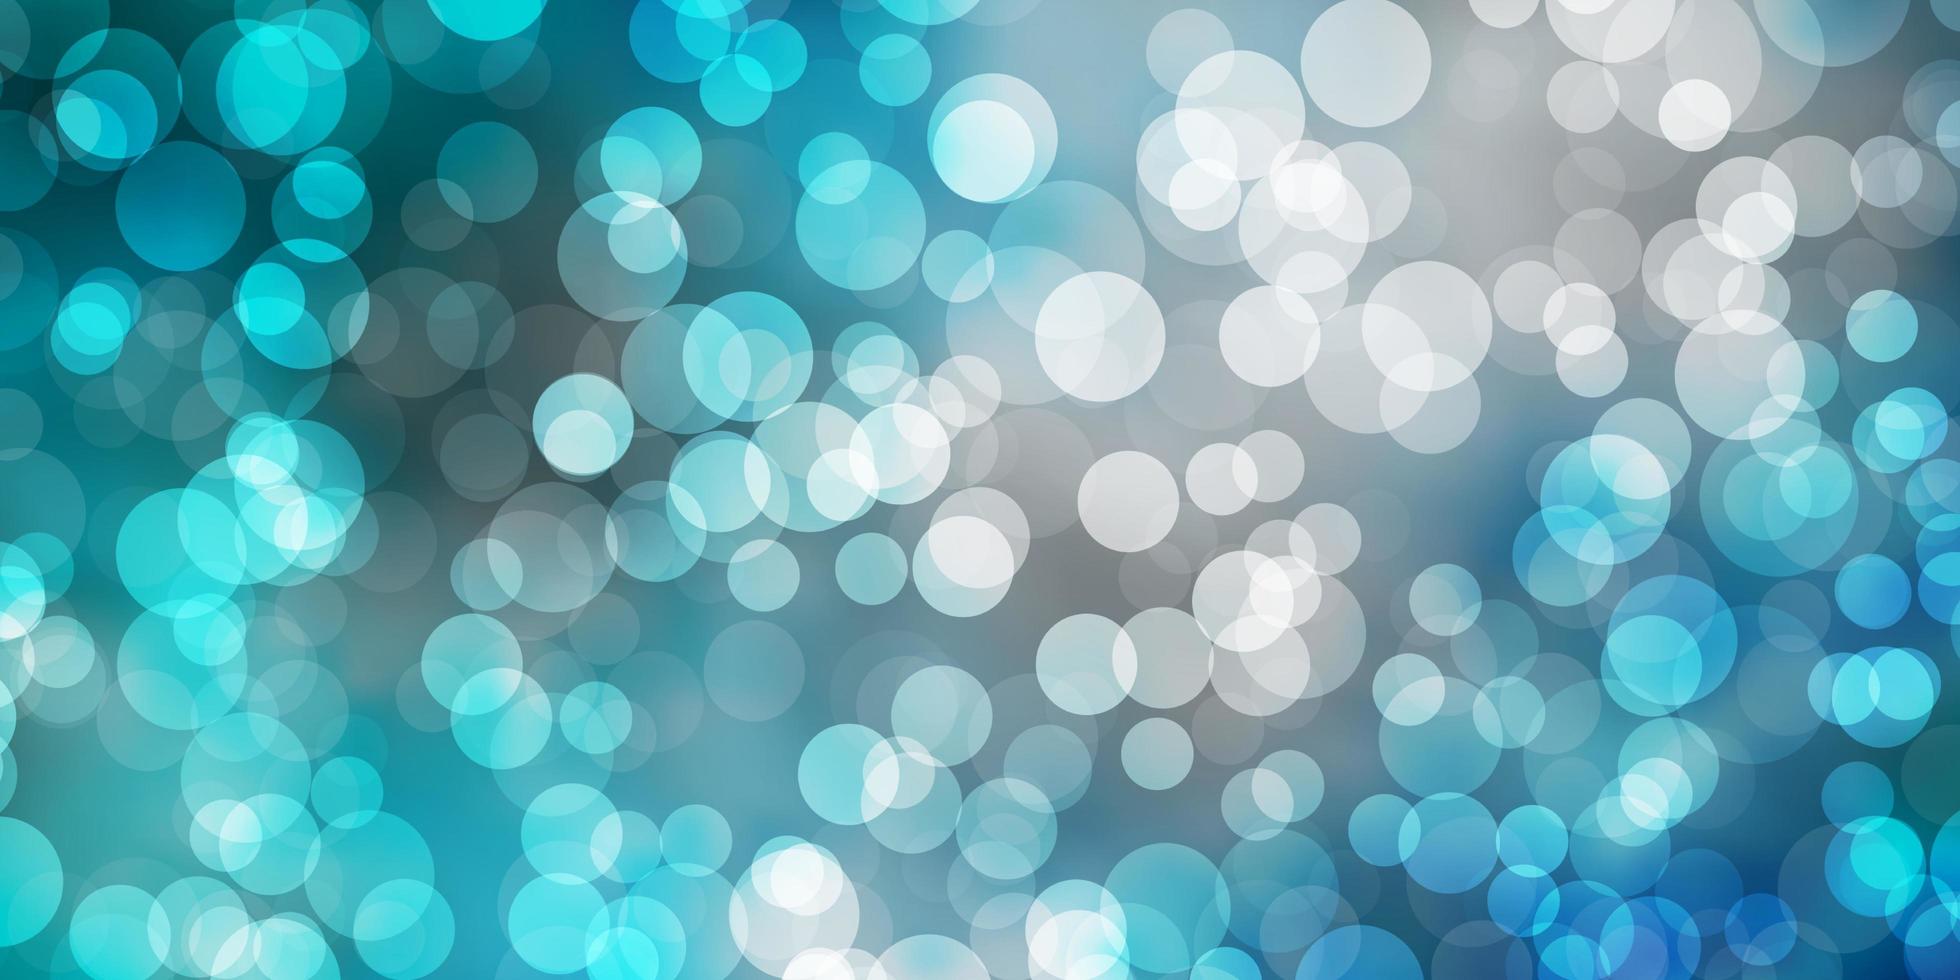 Light BLUE vector background with spots.